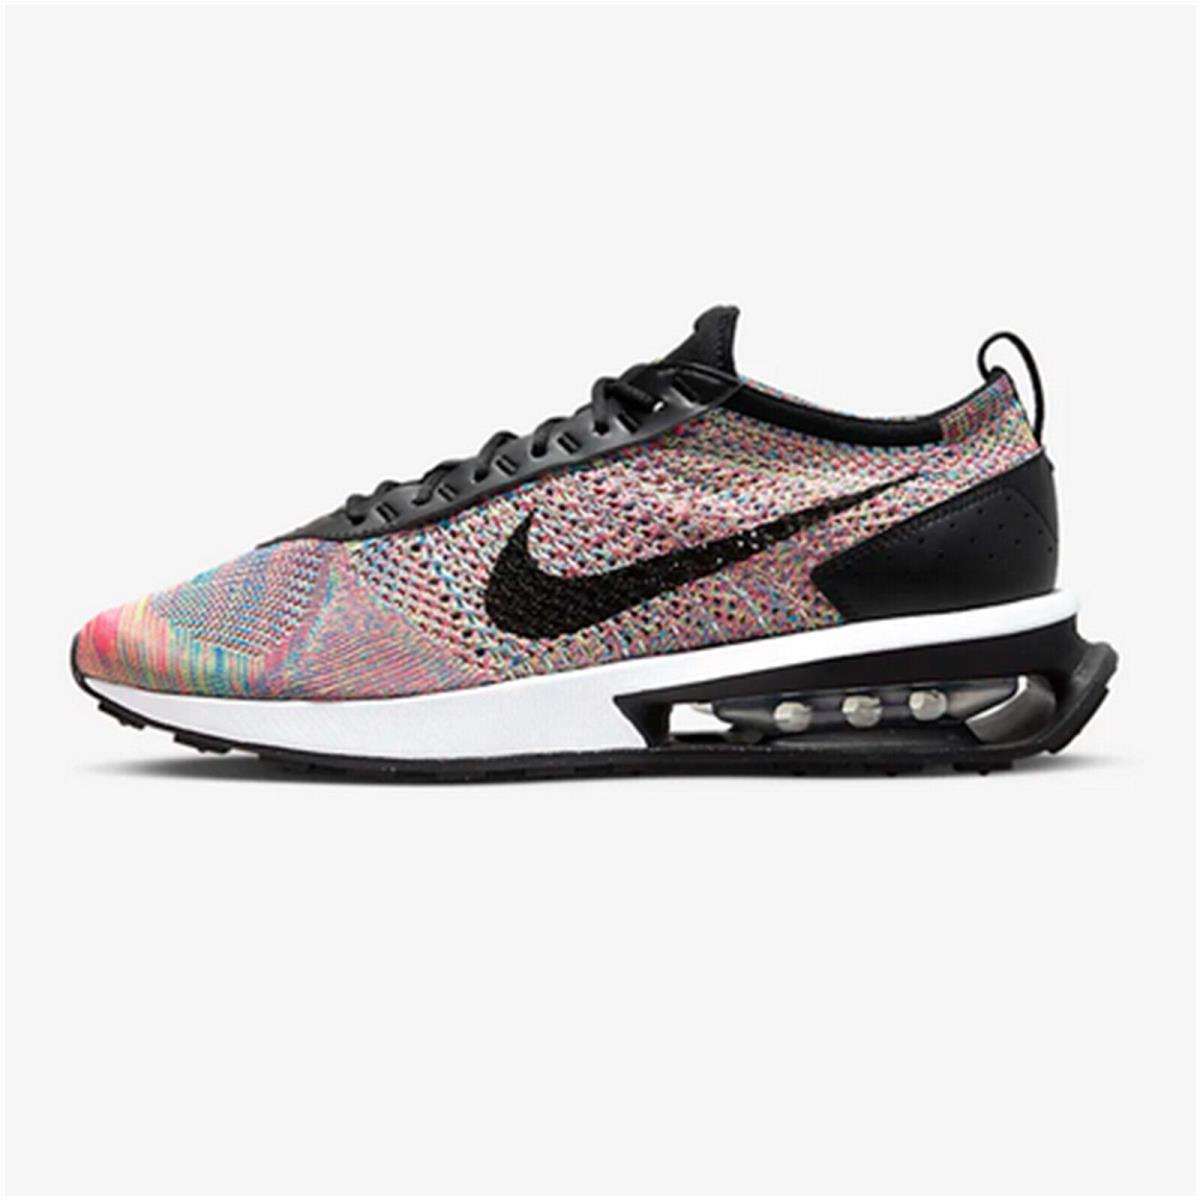 Nike shoes Air Max Flyknit Racer - GHOST GREEN/BLACK-PINK BLAST 1